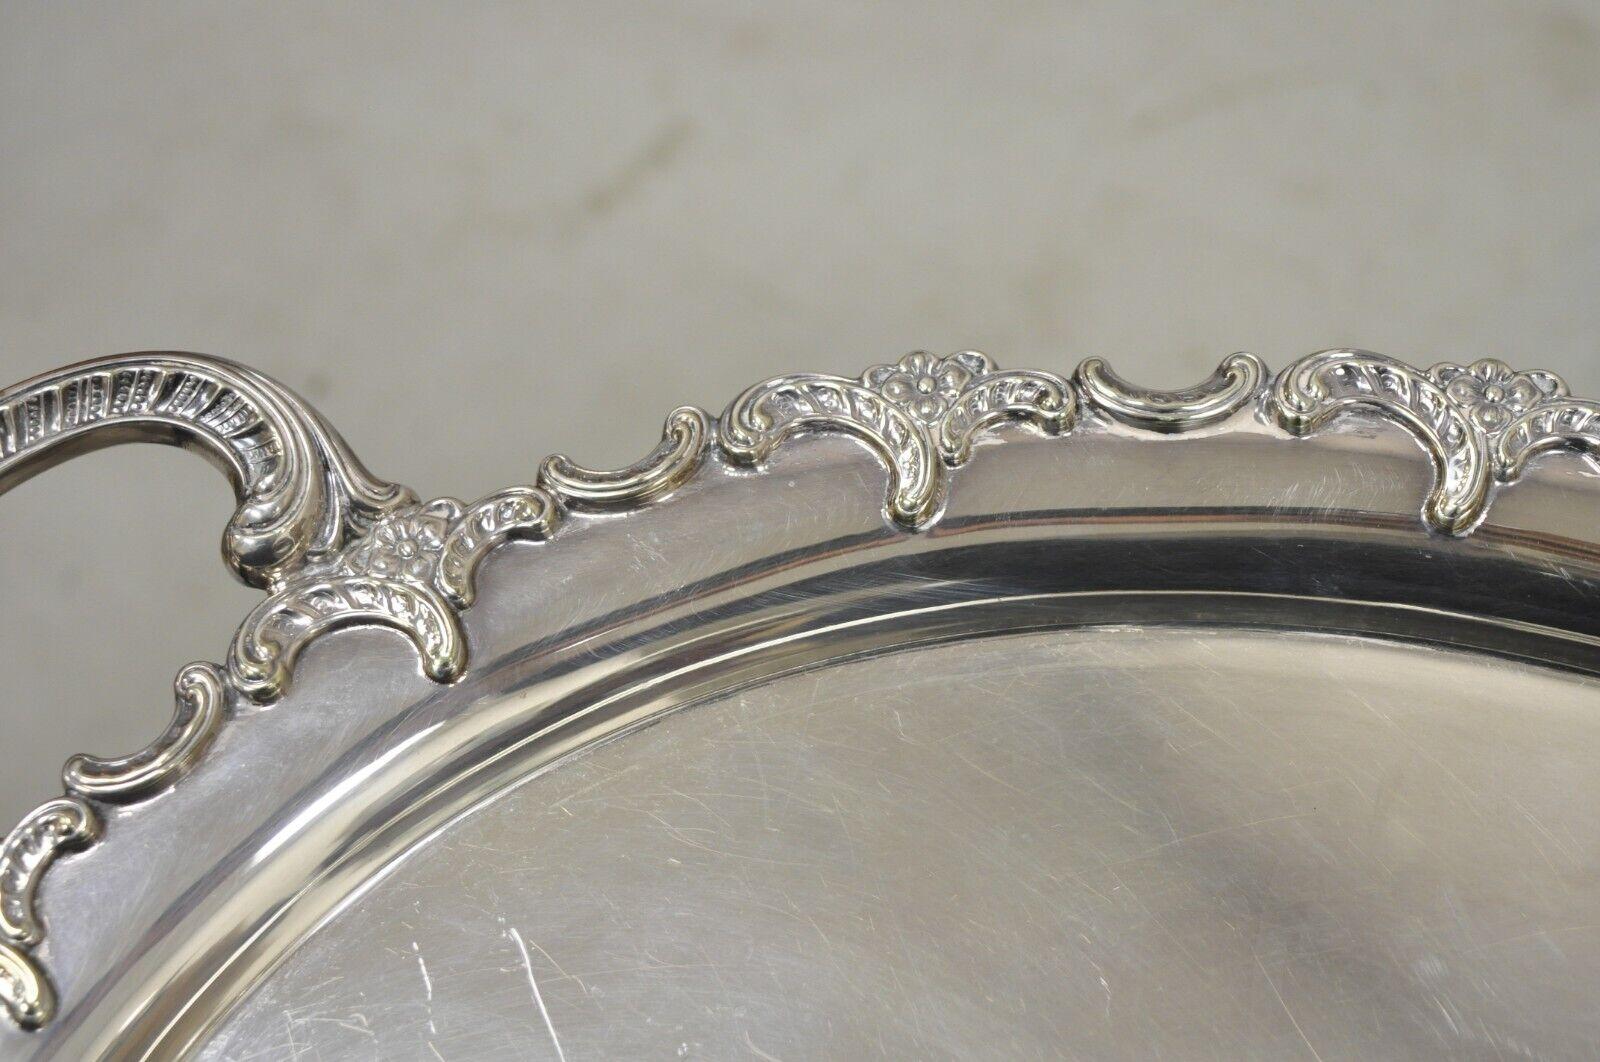 Vintage Handarbelt Alpacca Silver Plate Oval Tray Serving Platter In Good Condition For Sale In Philadelphia, PA